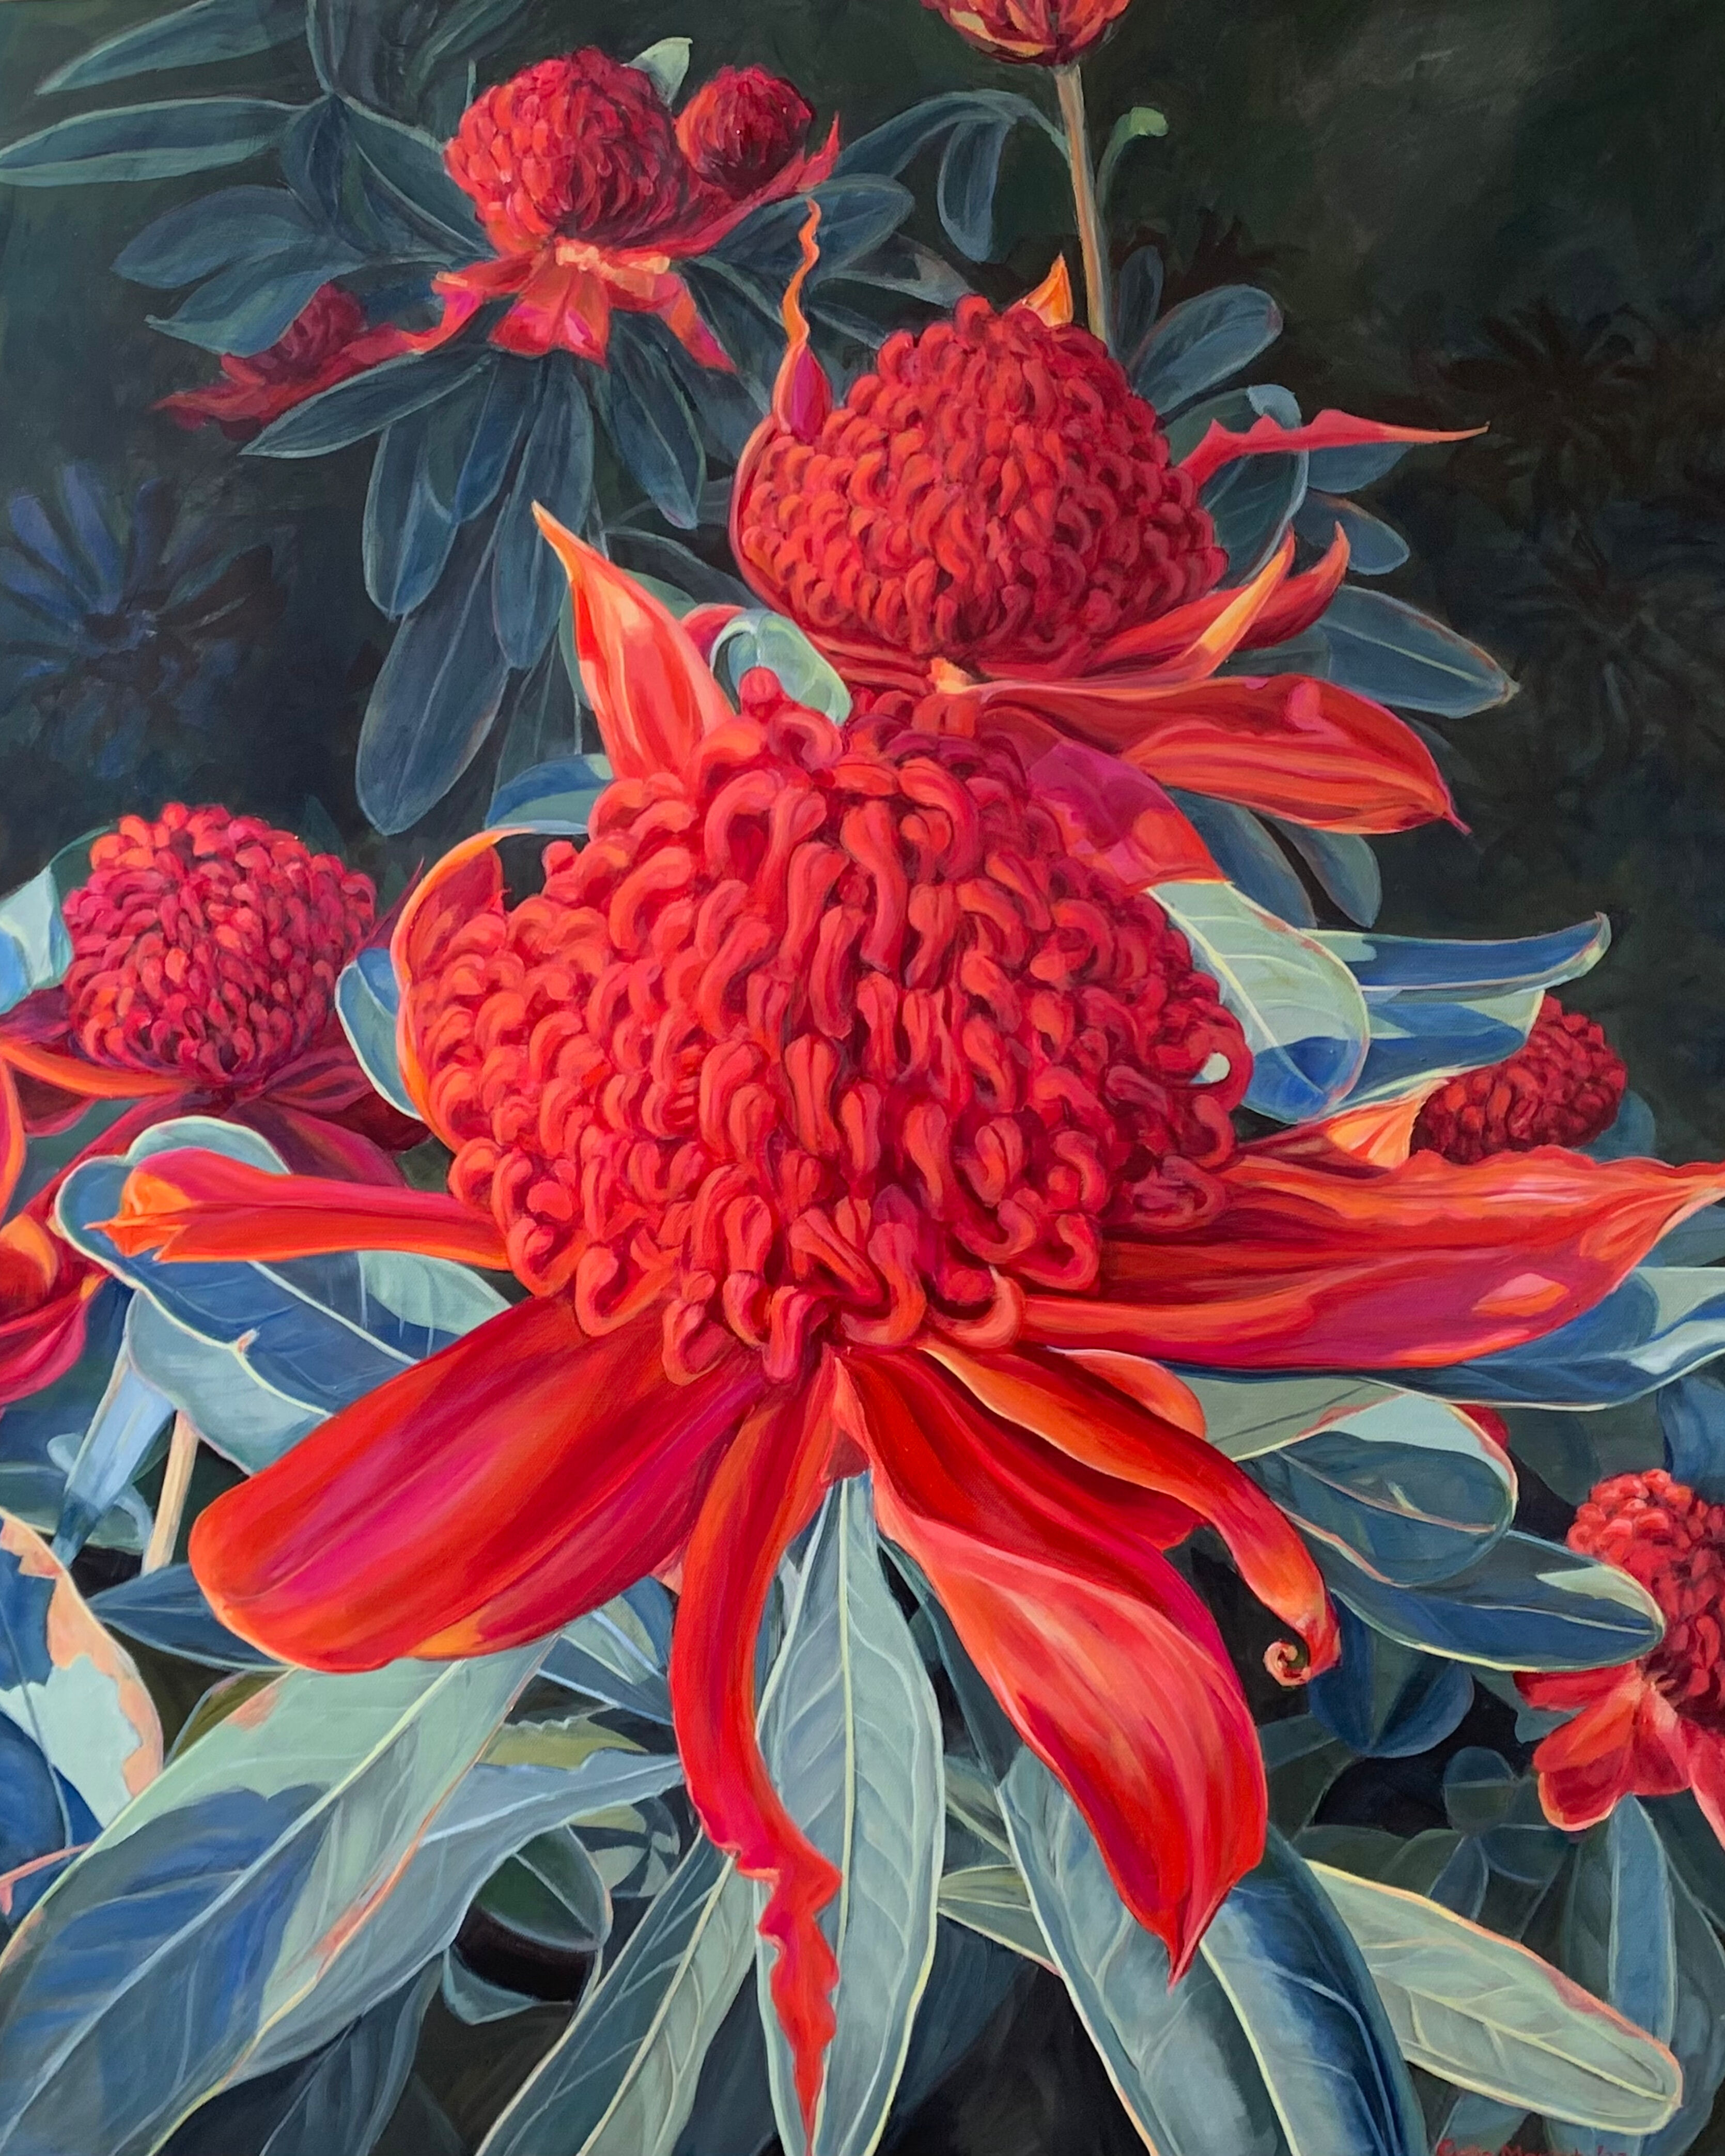 Waratah in the Front Yard 2022 Acrylic on canvas 91.4 x 76.2 cm Image courstesy of Celia Moriarty - Celia Moriarty